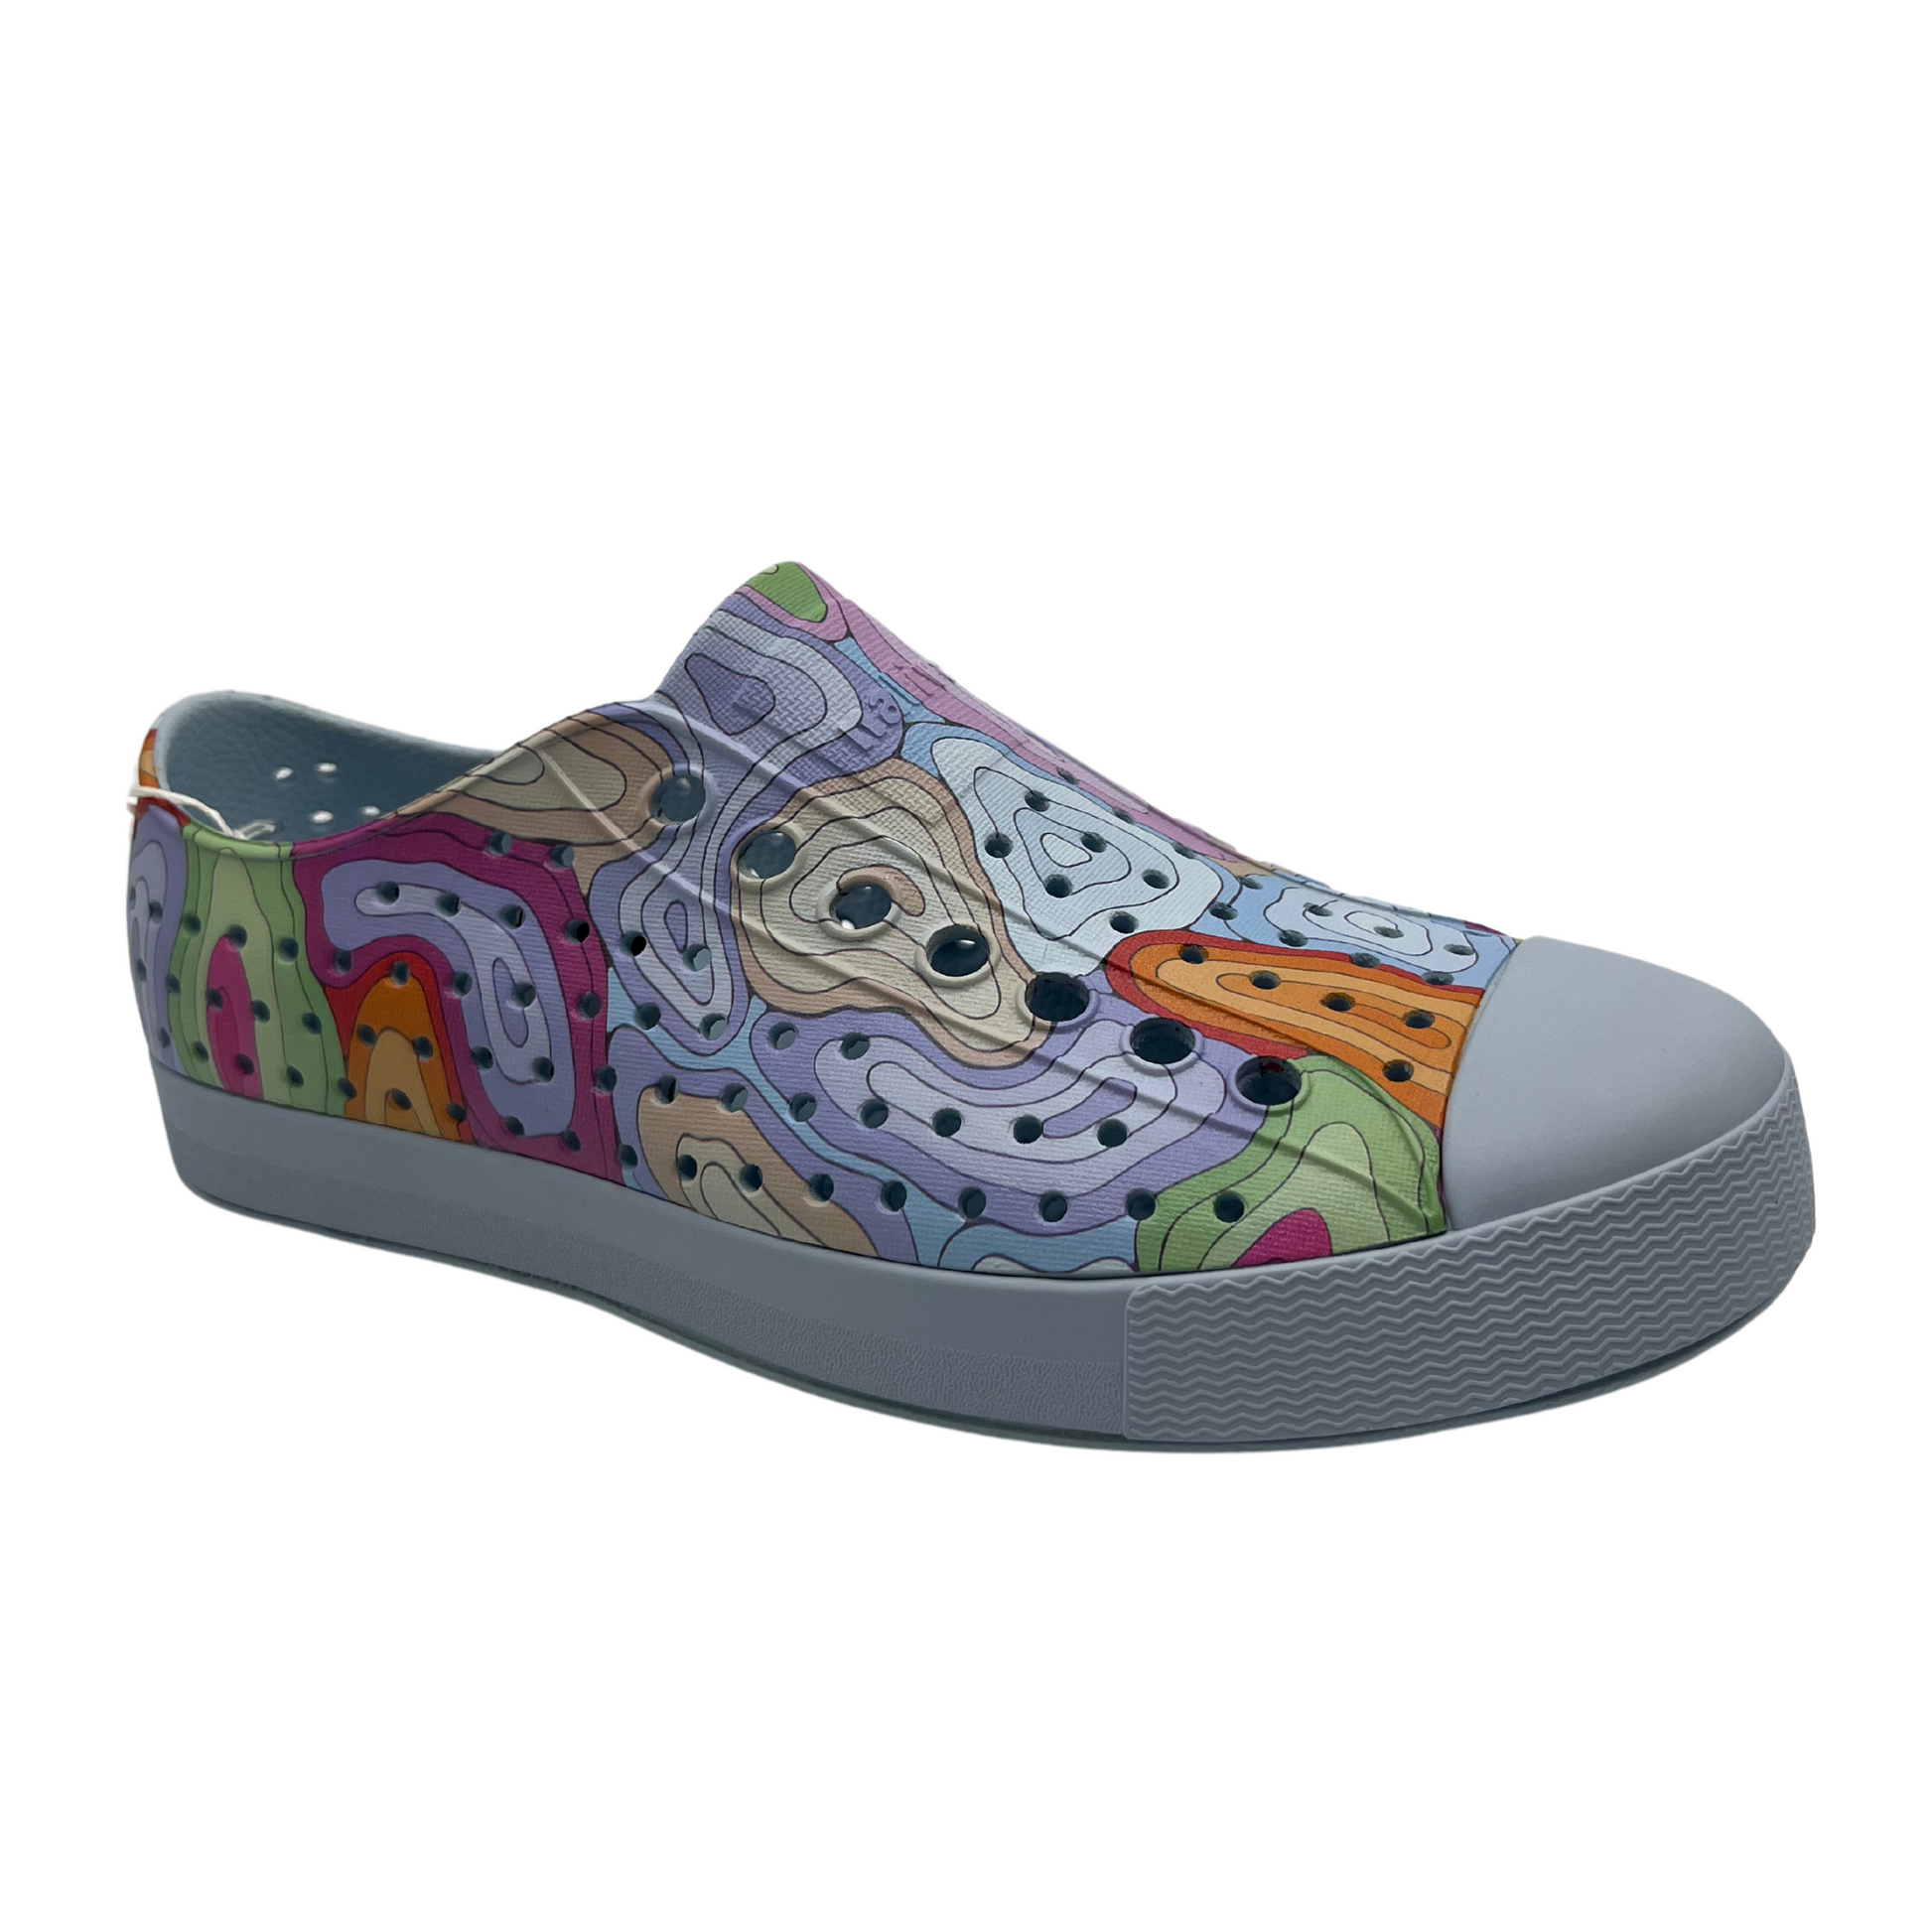 45 degree angled view of colourful EVA slip on shoes with rounded toe and perforated upper